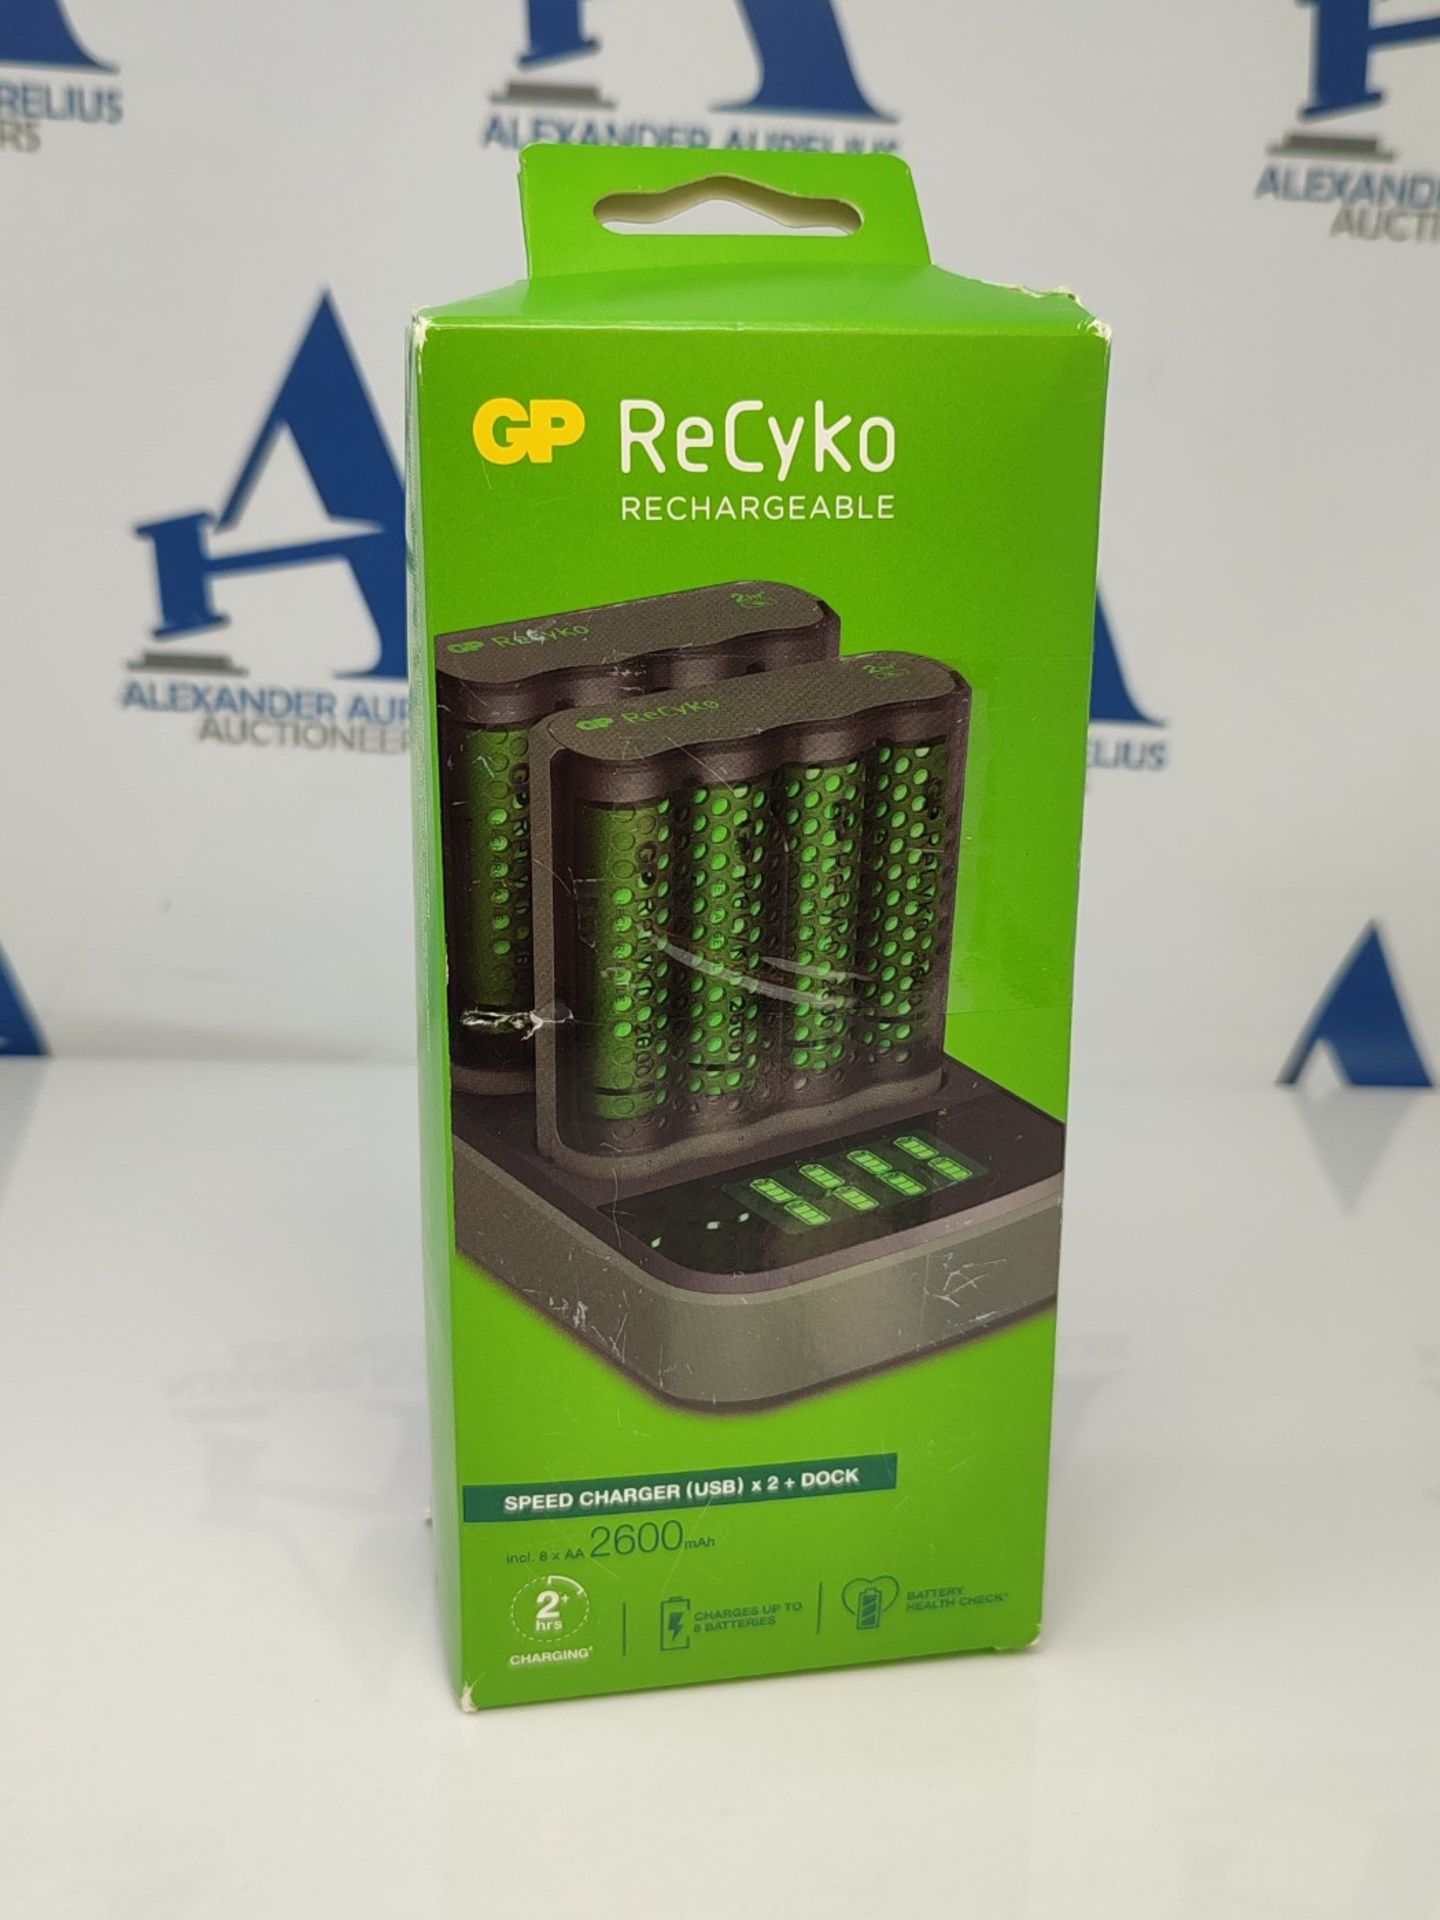 Quick USB Charger with 8 Rechargeable AA Batteries 2600 mAh included and LED display | - Image 2 of 6